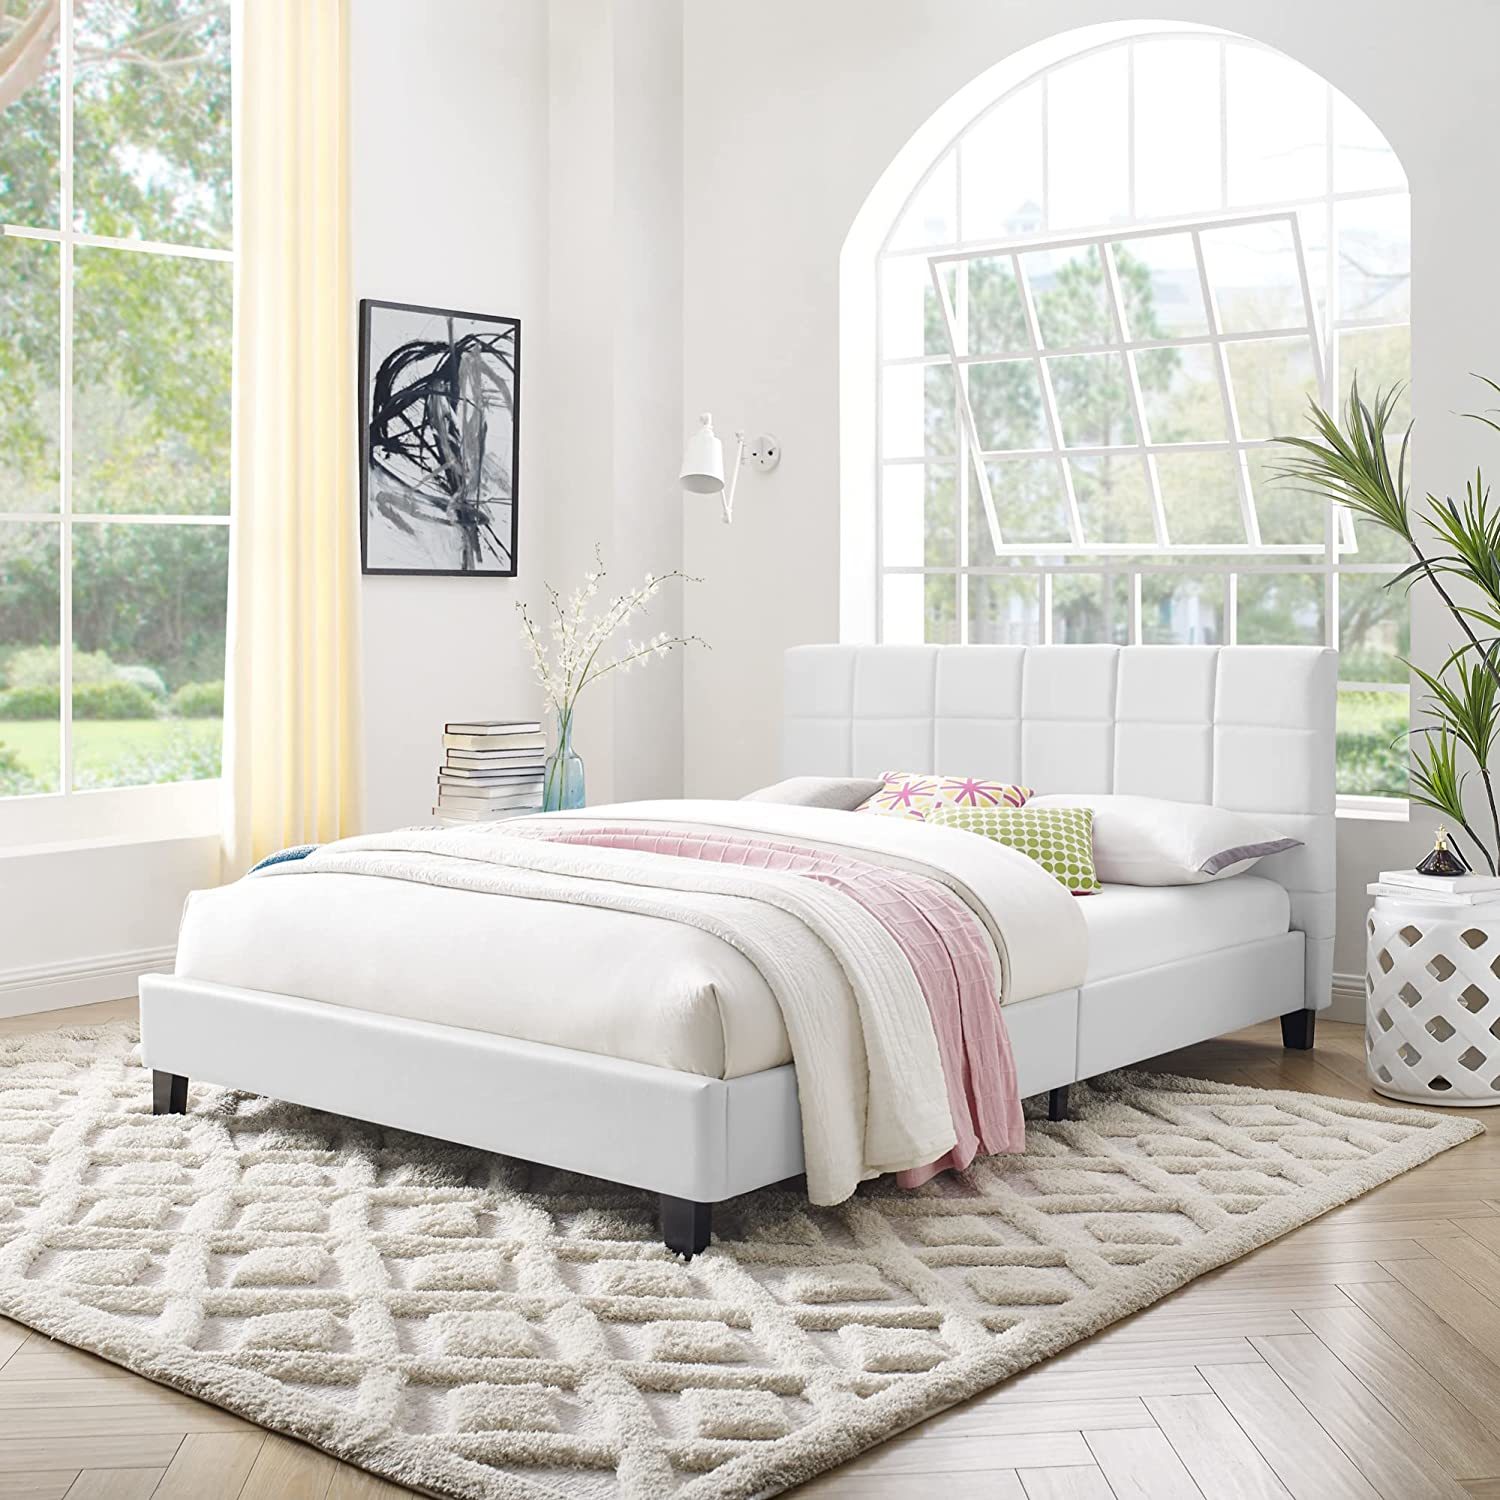 Primary image for Classic Brands Rockland White Faux Leather Upholstered Platform Bed, Queen